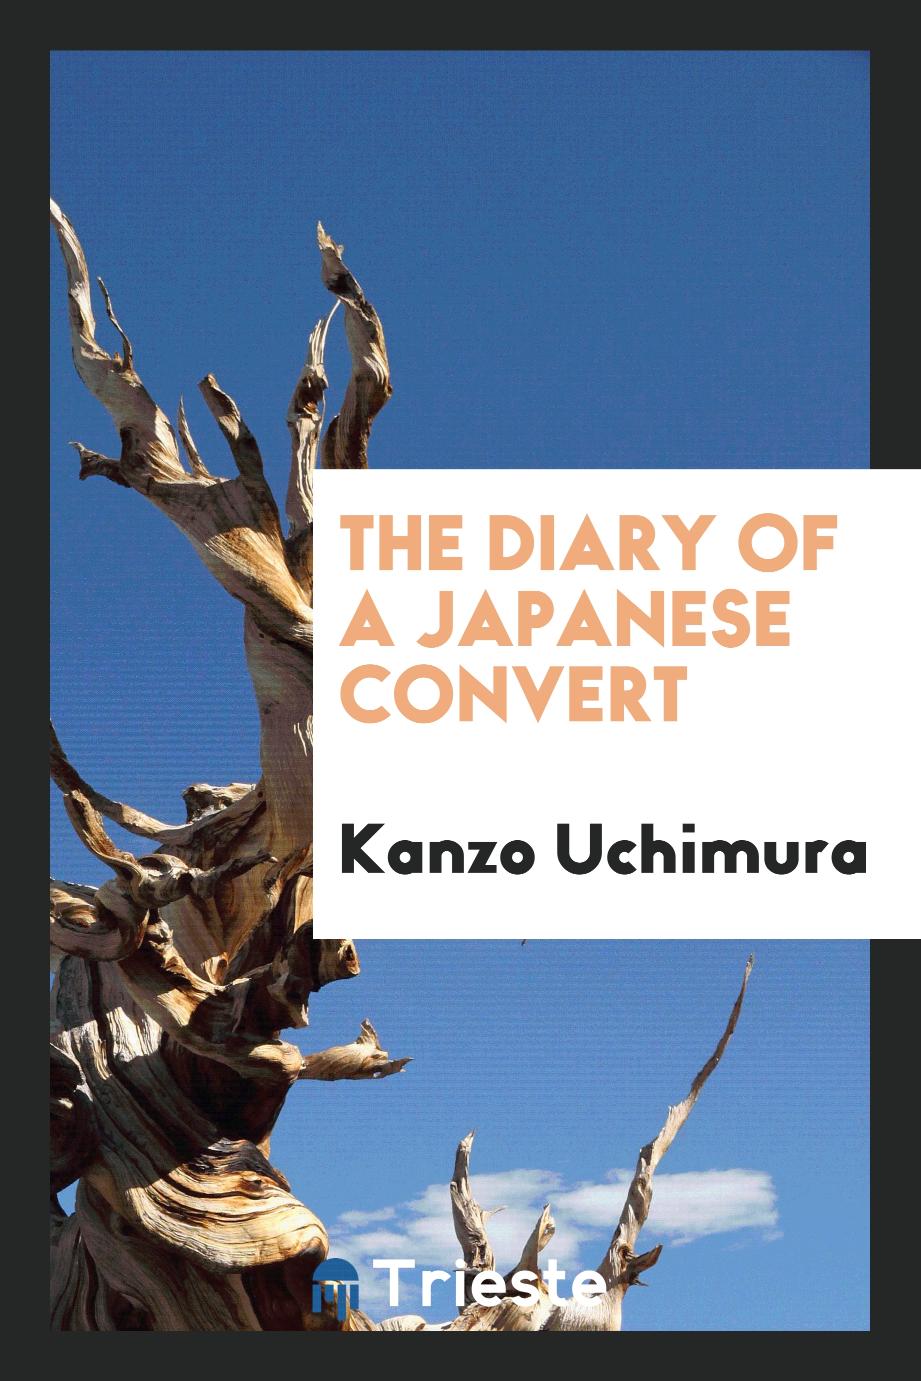 The diary of a Japanese convert